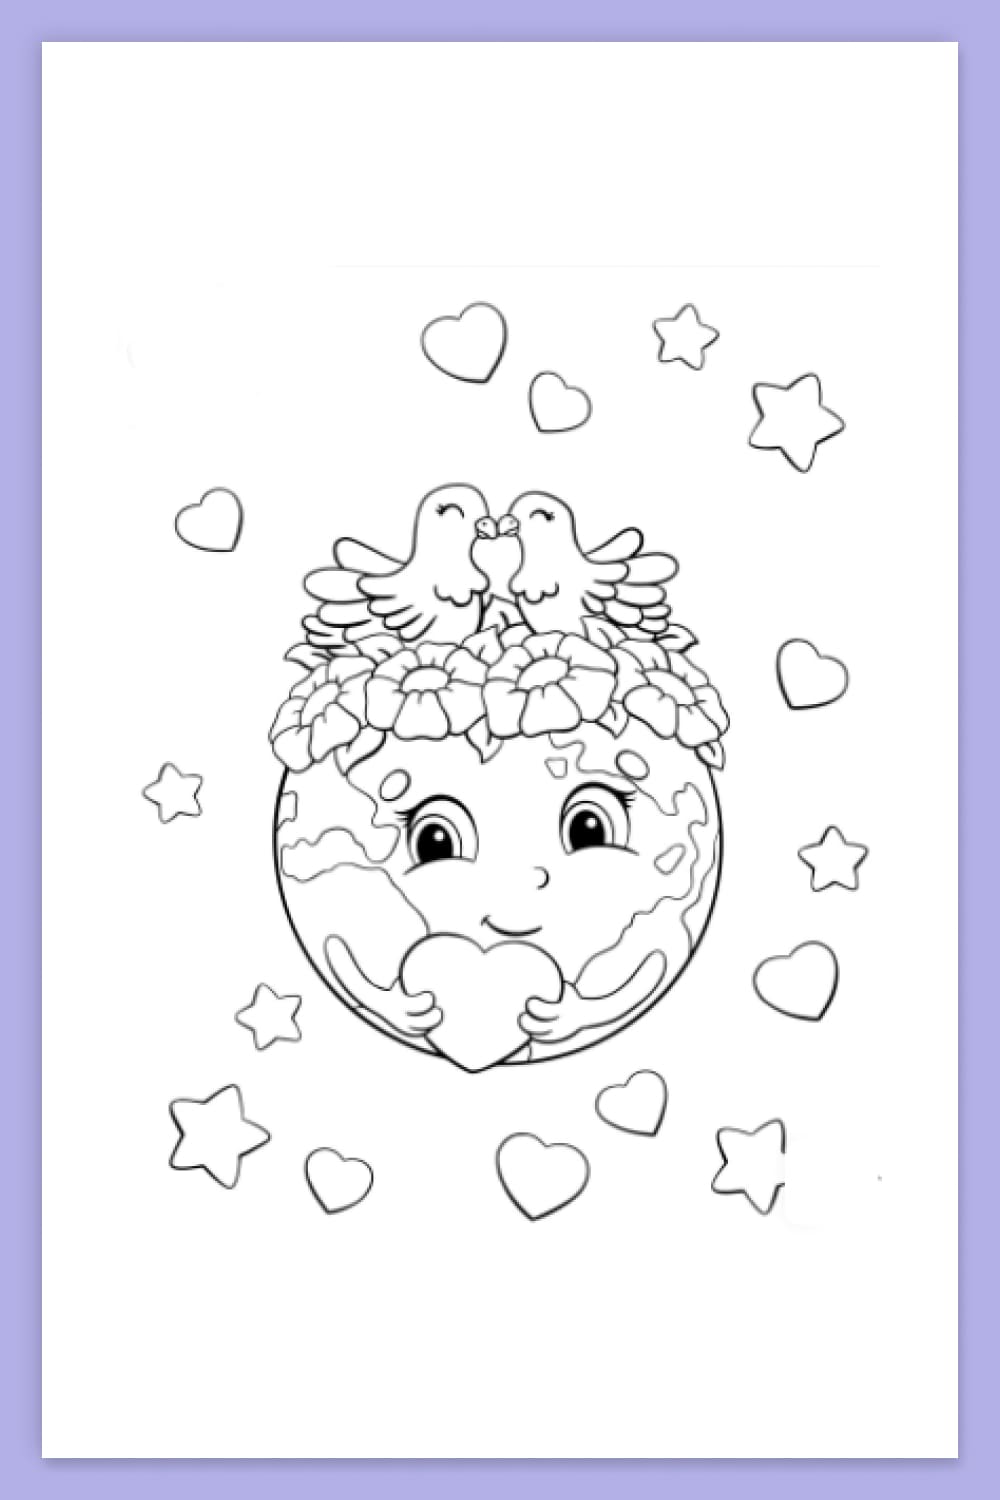 An image of the planet Earth with doves in flowers on it and a heart in their hands.